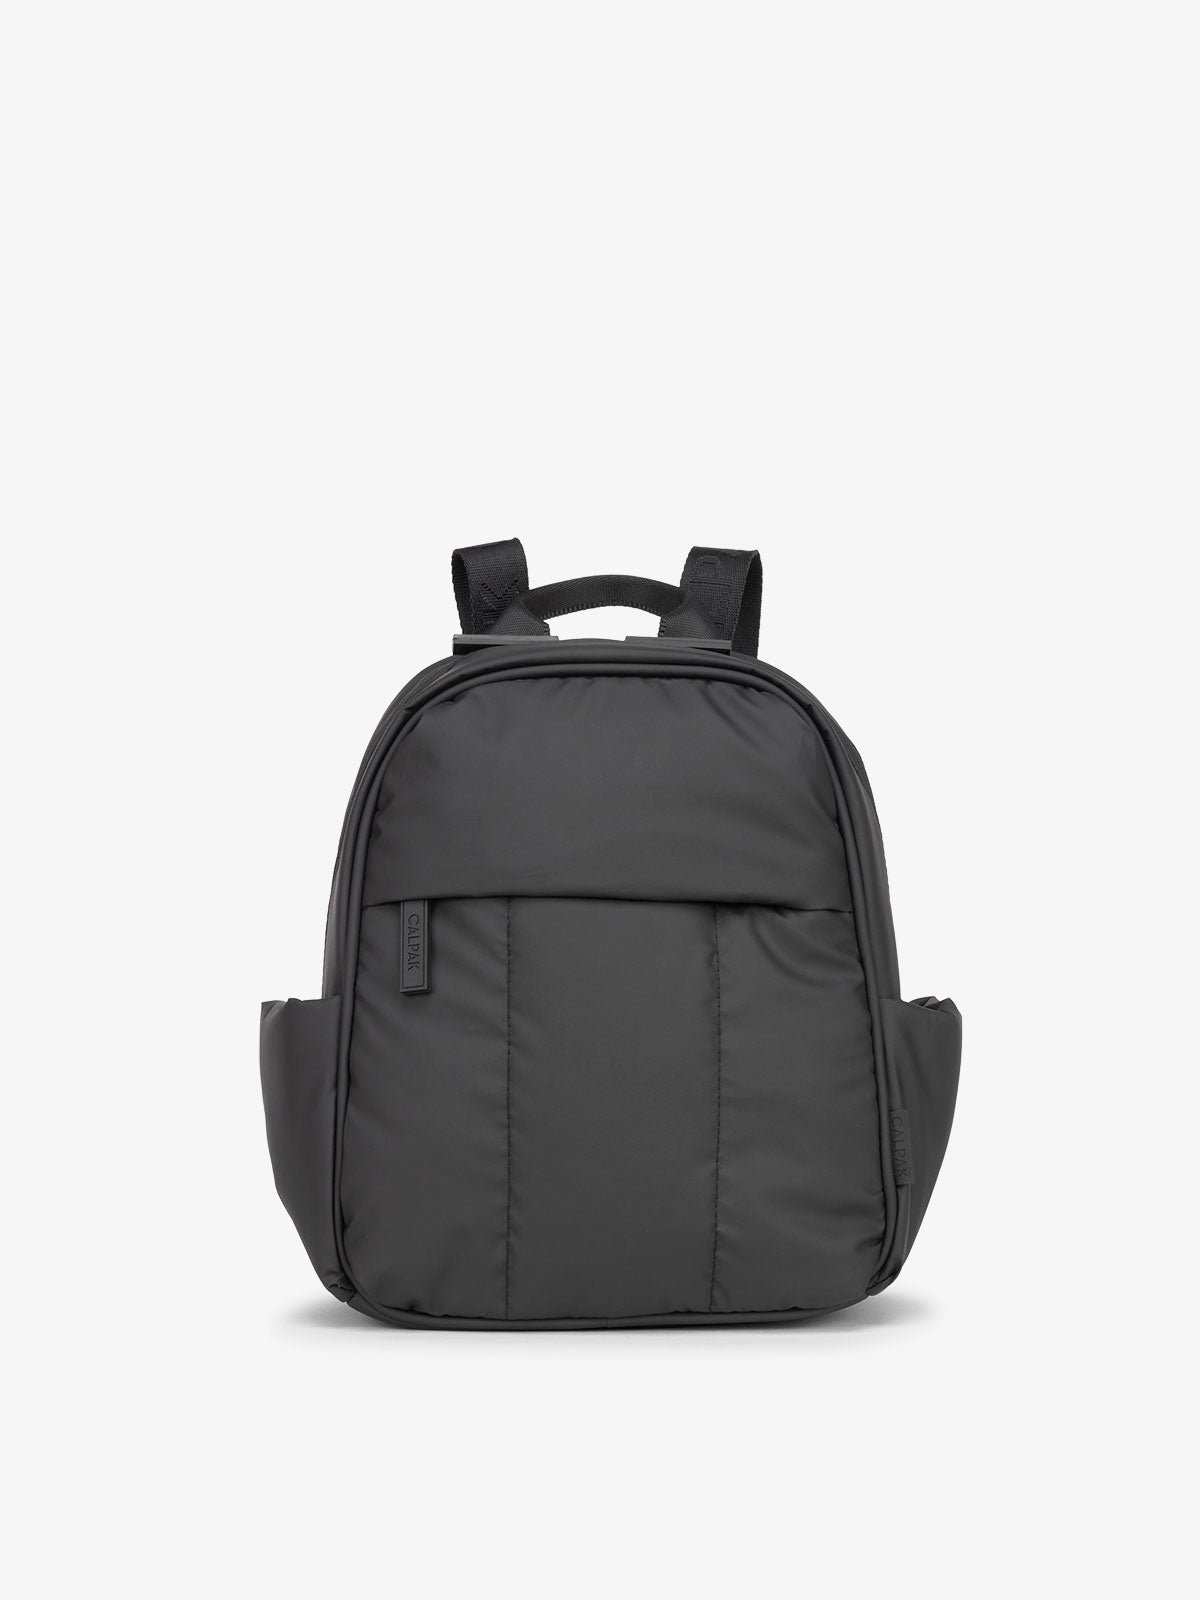 CALPAK Luka small Backpack with zippered front pocket in black